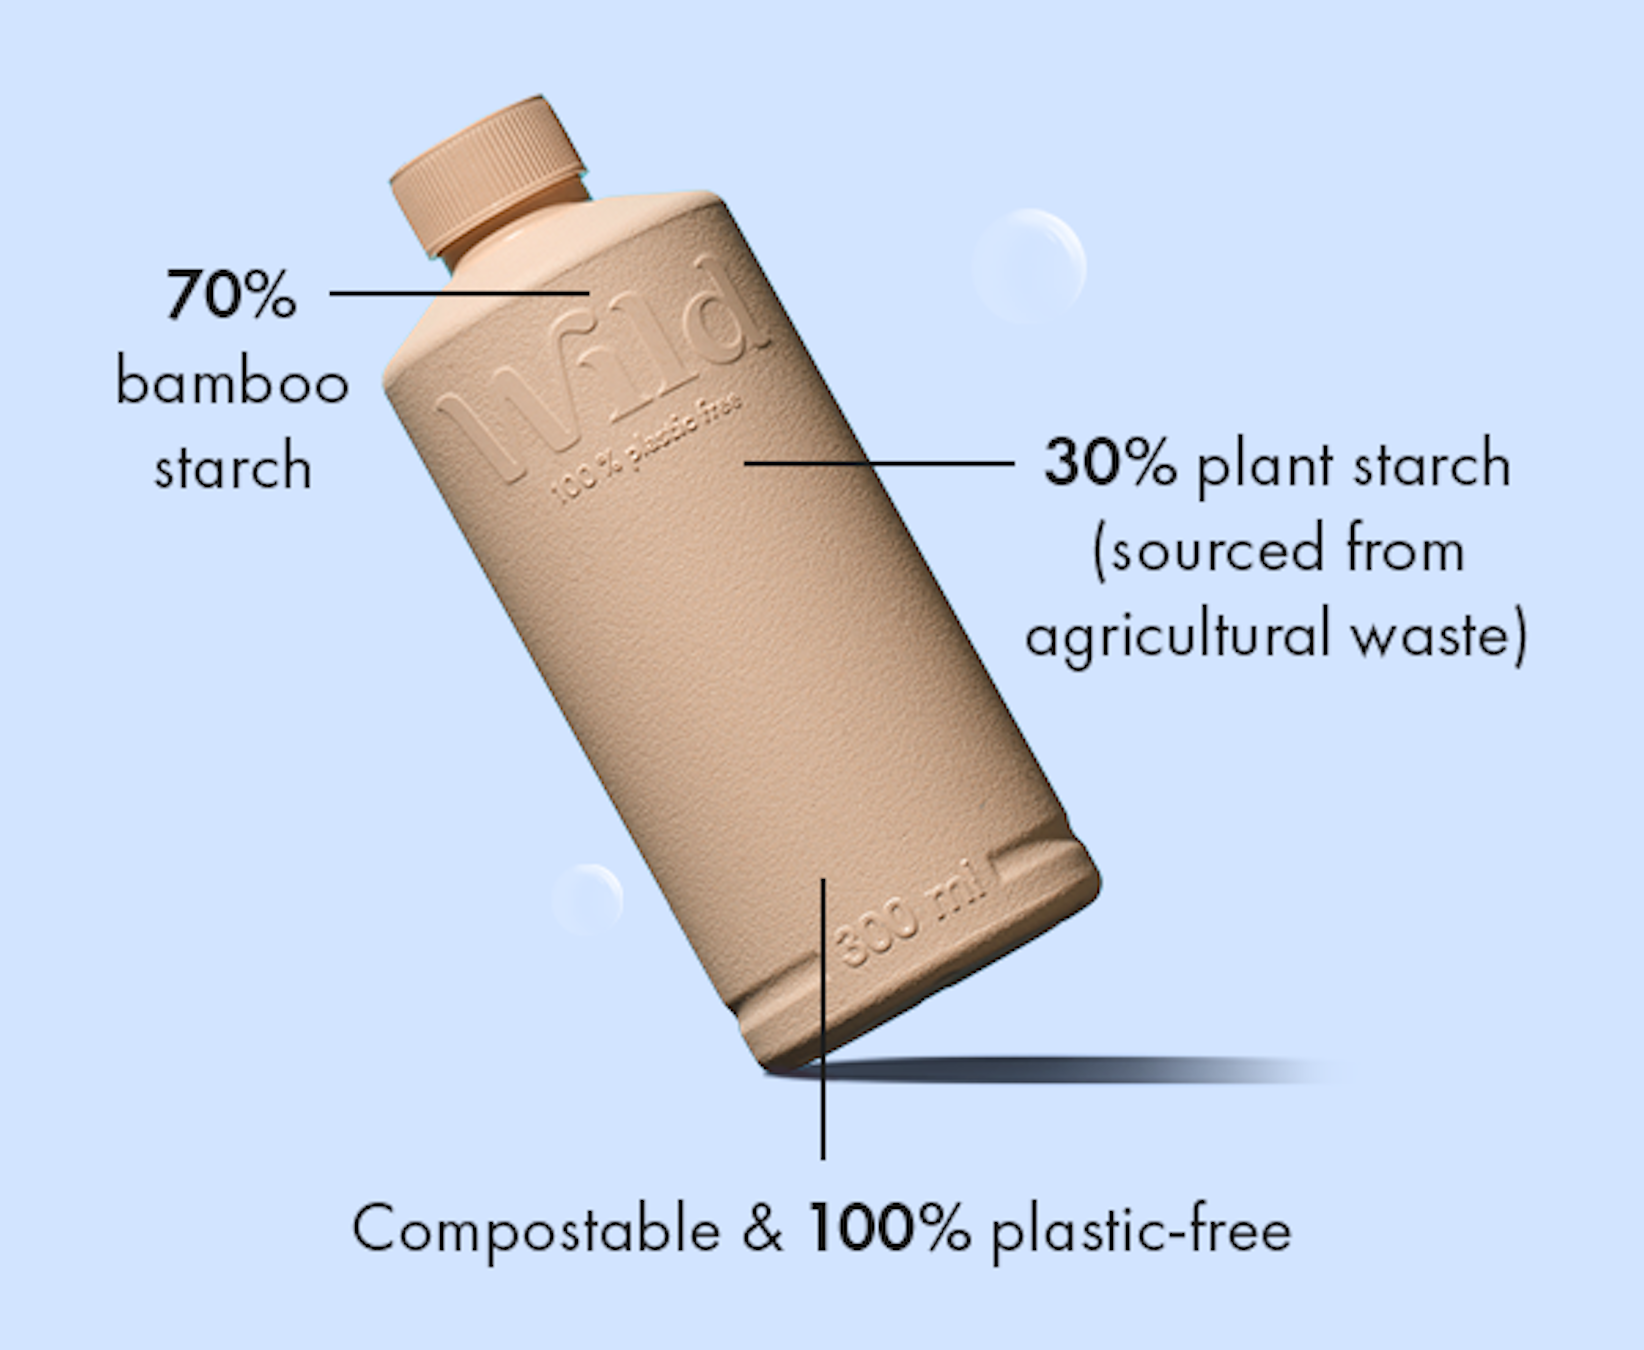 The world's first plastic-free deodorant refill is made of bamboo